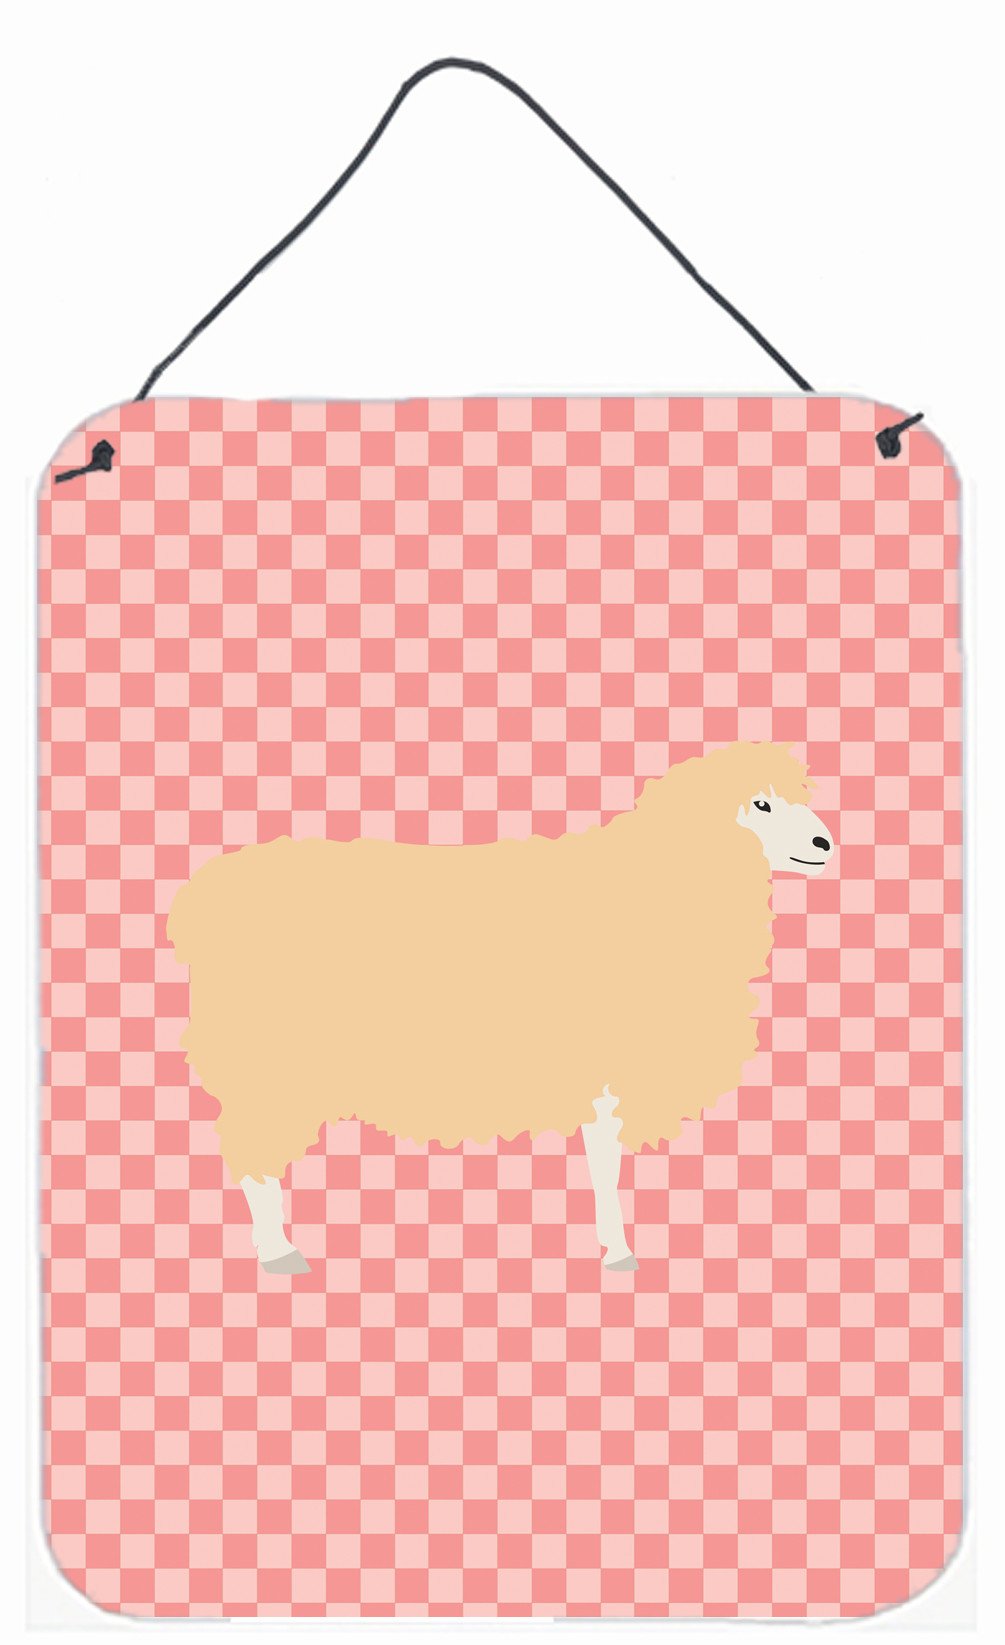 English Leicester Longwool Sheep Pink Check Wall or Door Hanging Prints BB7974DS1216 by Caroline's Treasures